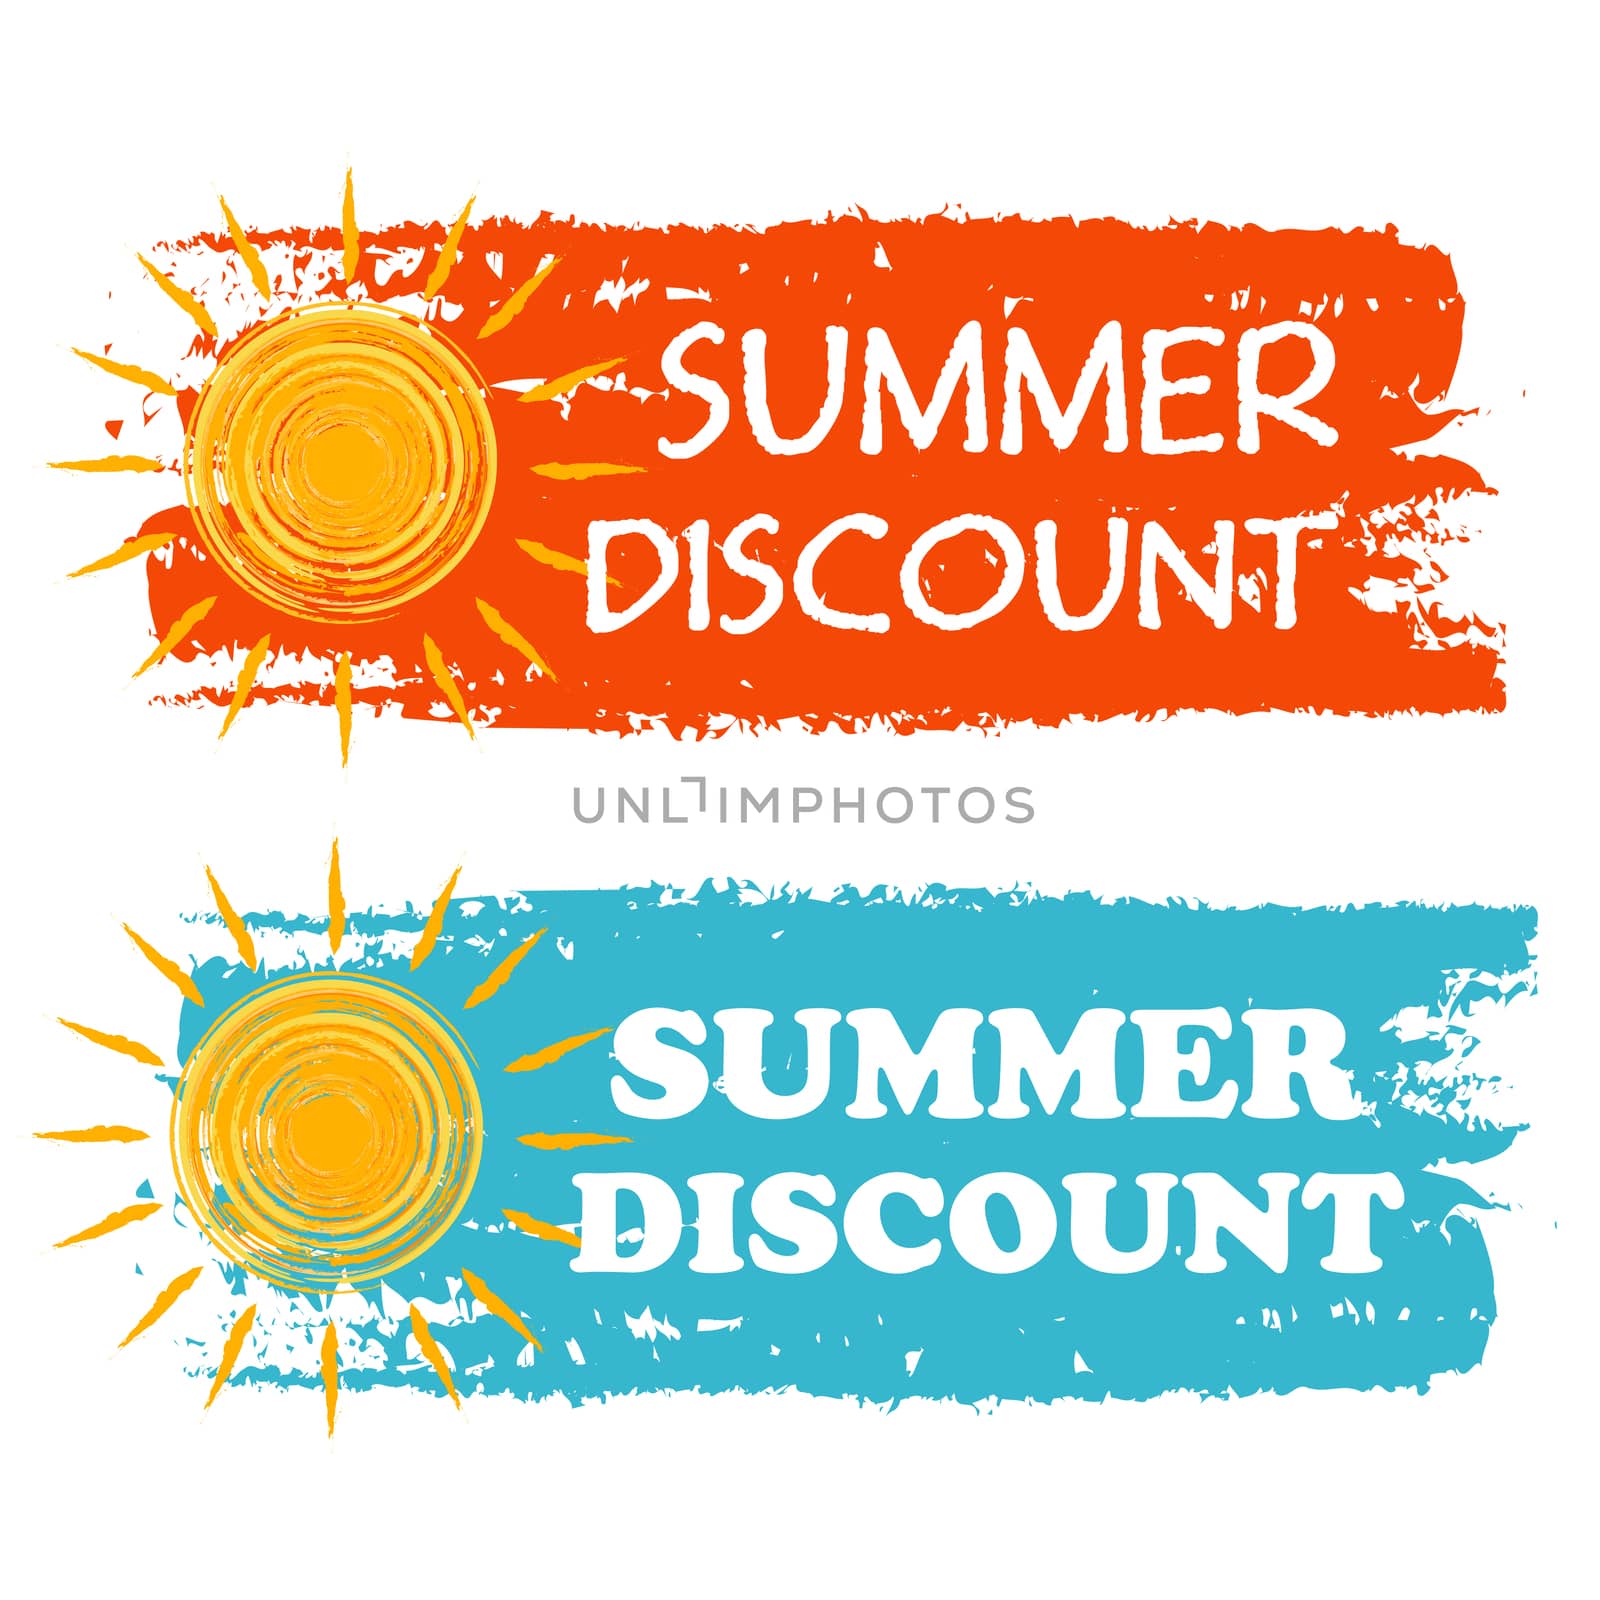 summer discount banners - text in orange and blue drawn labels with yellow sun symbol, business seasonal shopping concept